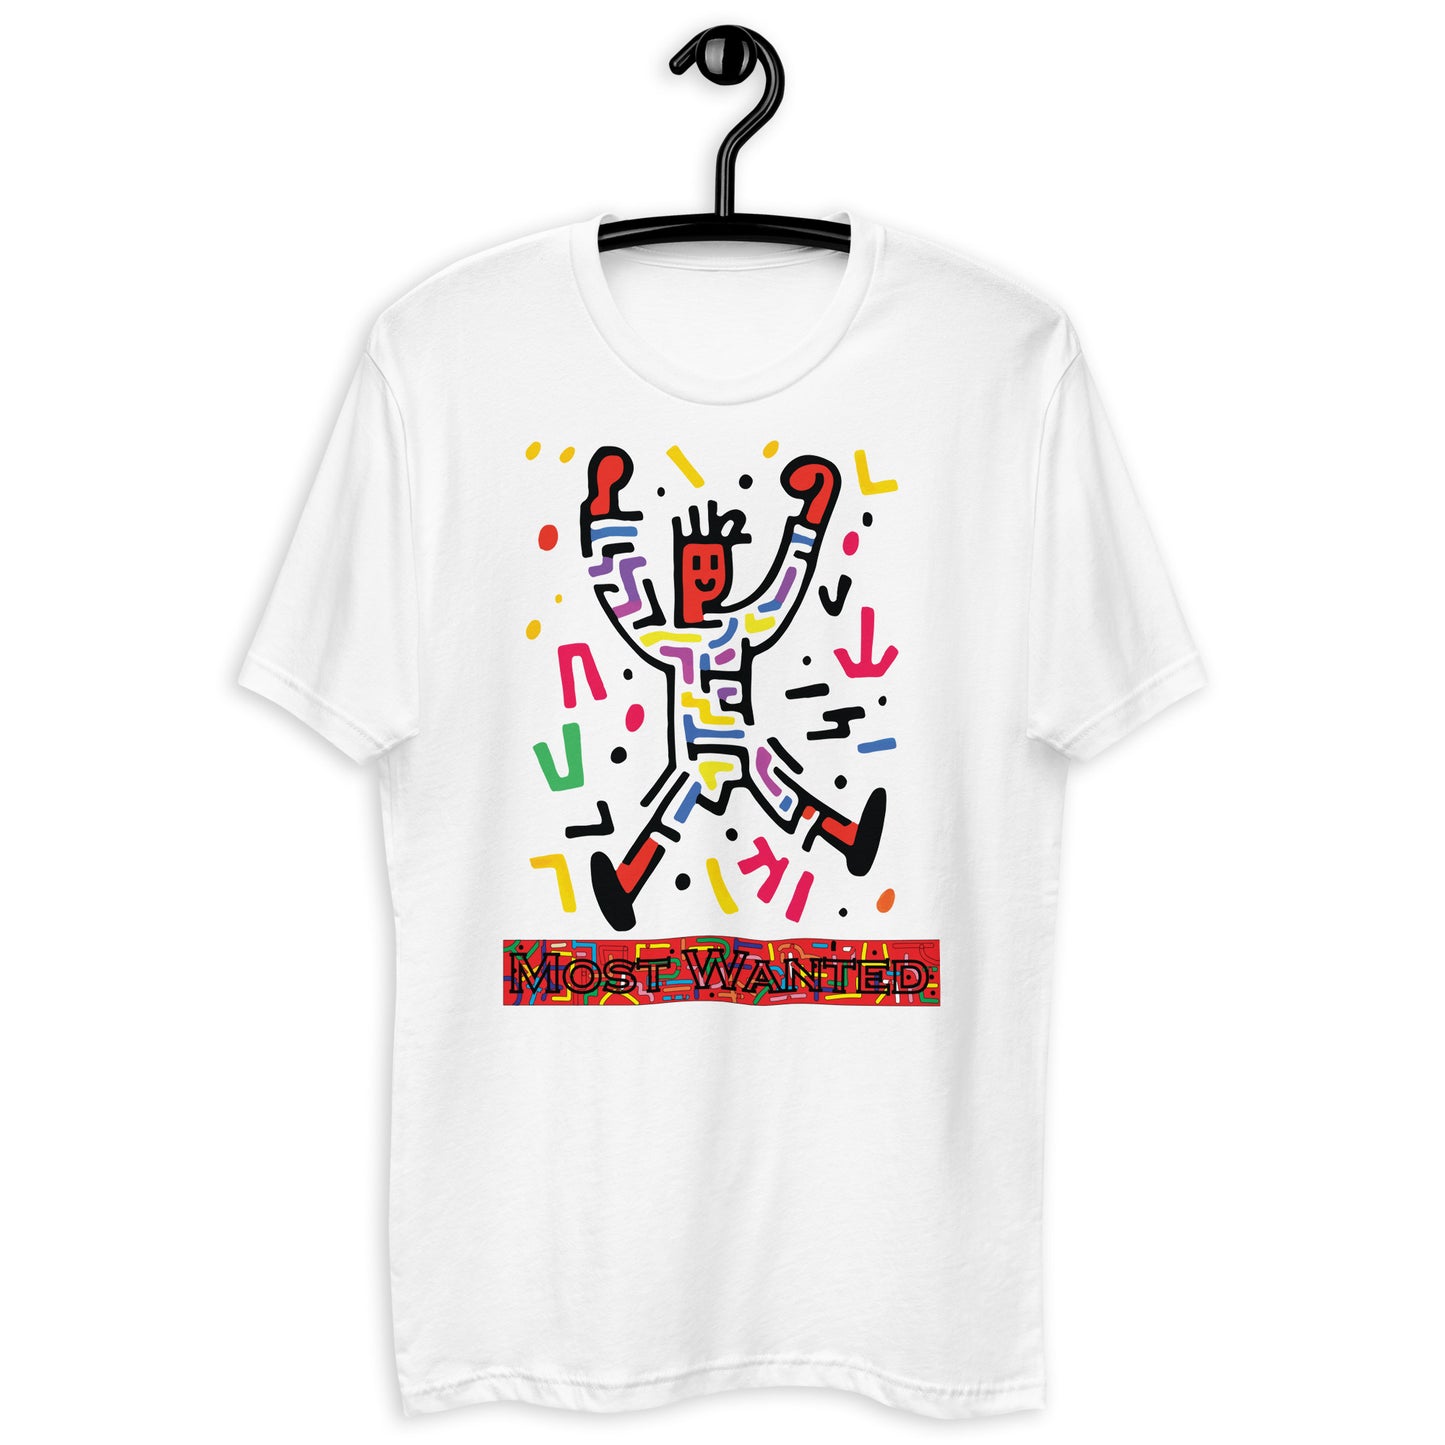 Doodles Me "Most Wanted" T-shirt #2